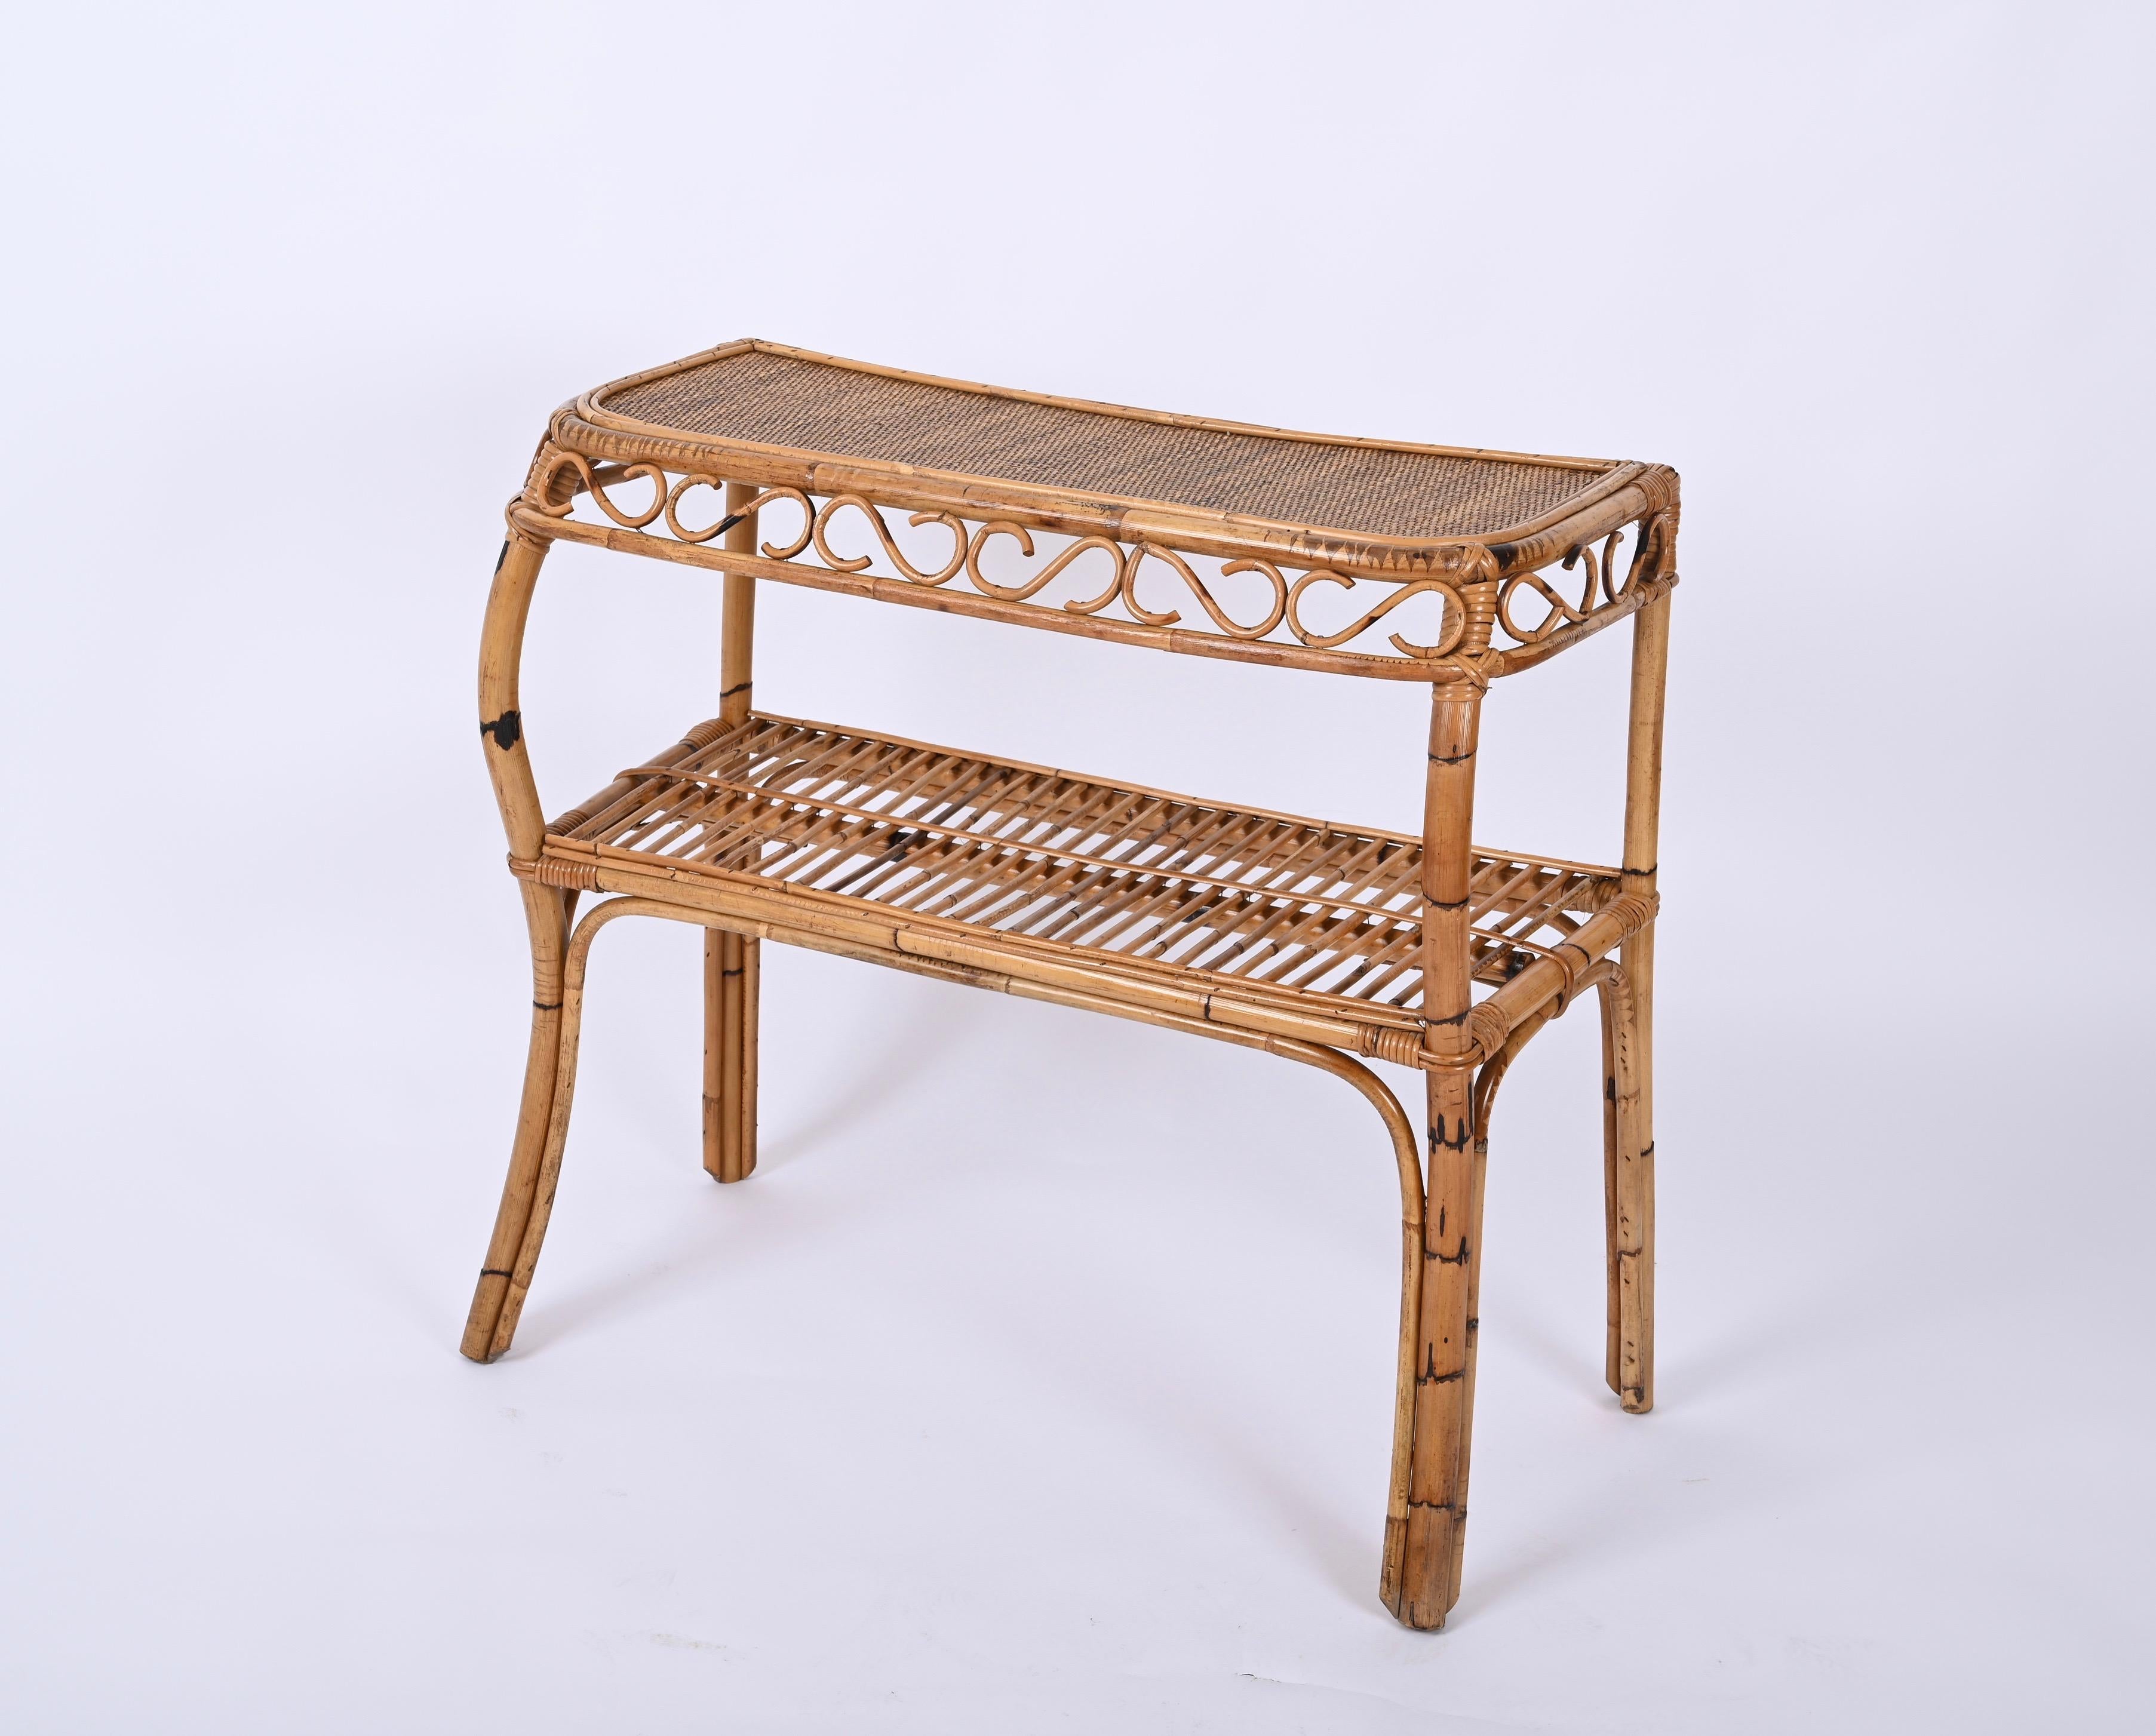 Midcentury Bamboo and Rattan Console Table, Franco Albini, Italy, 1960s For Sale 3